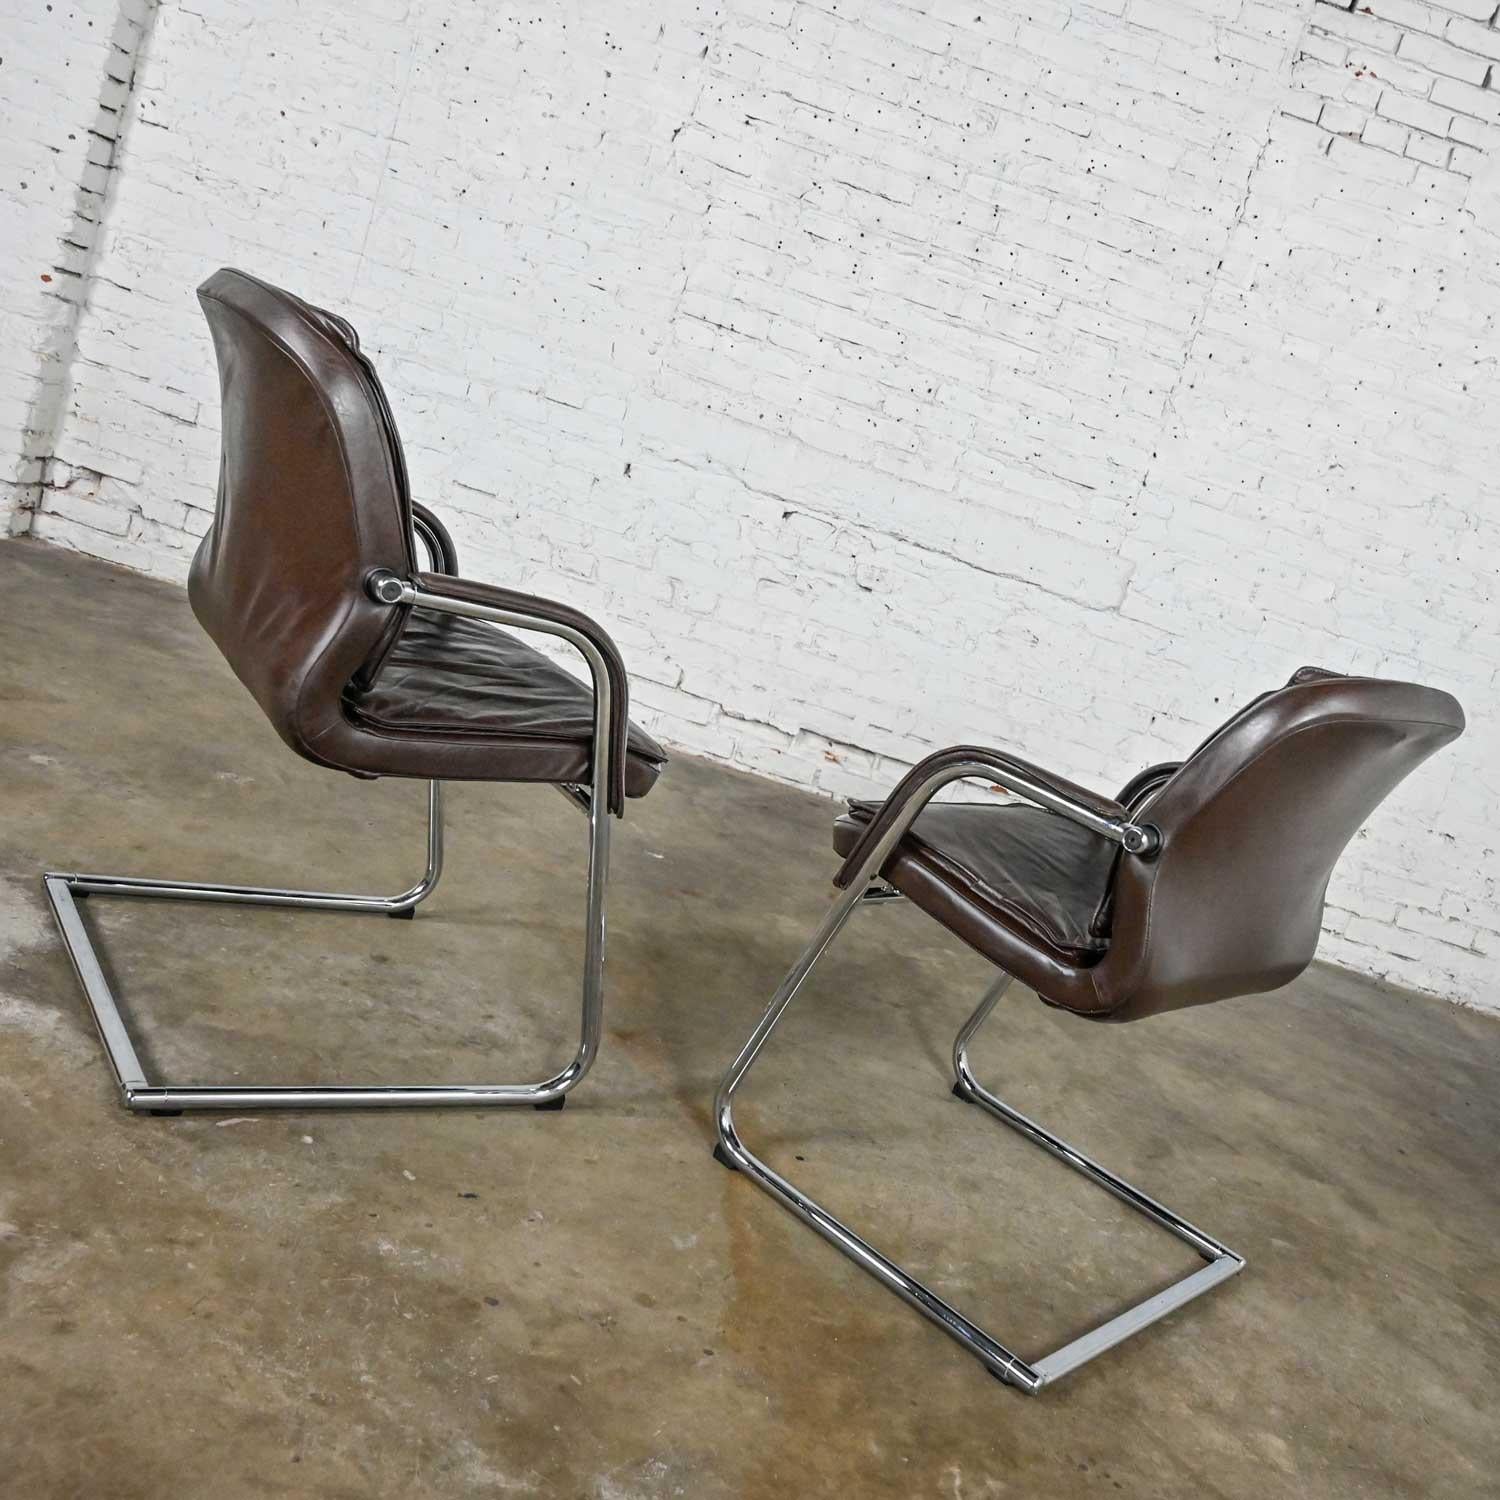 vecta chairs